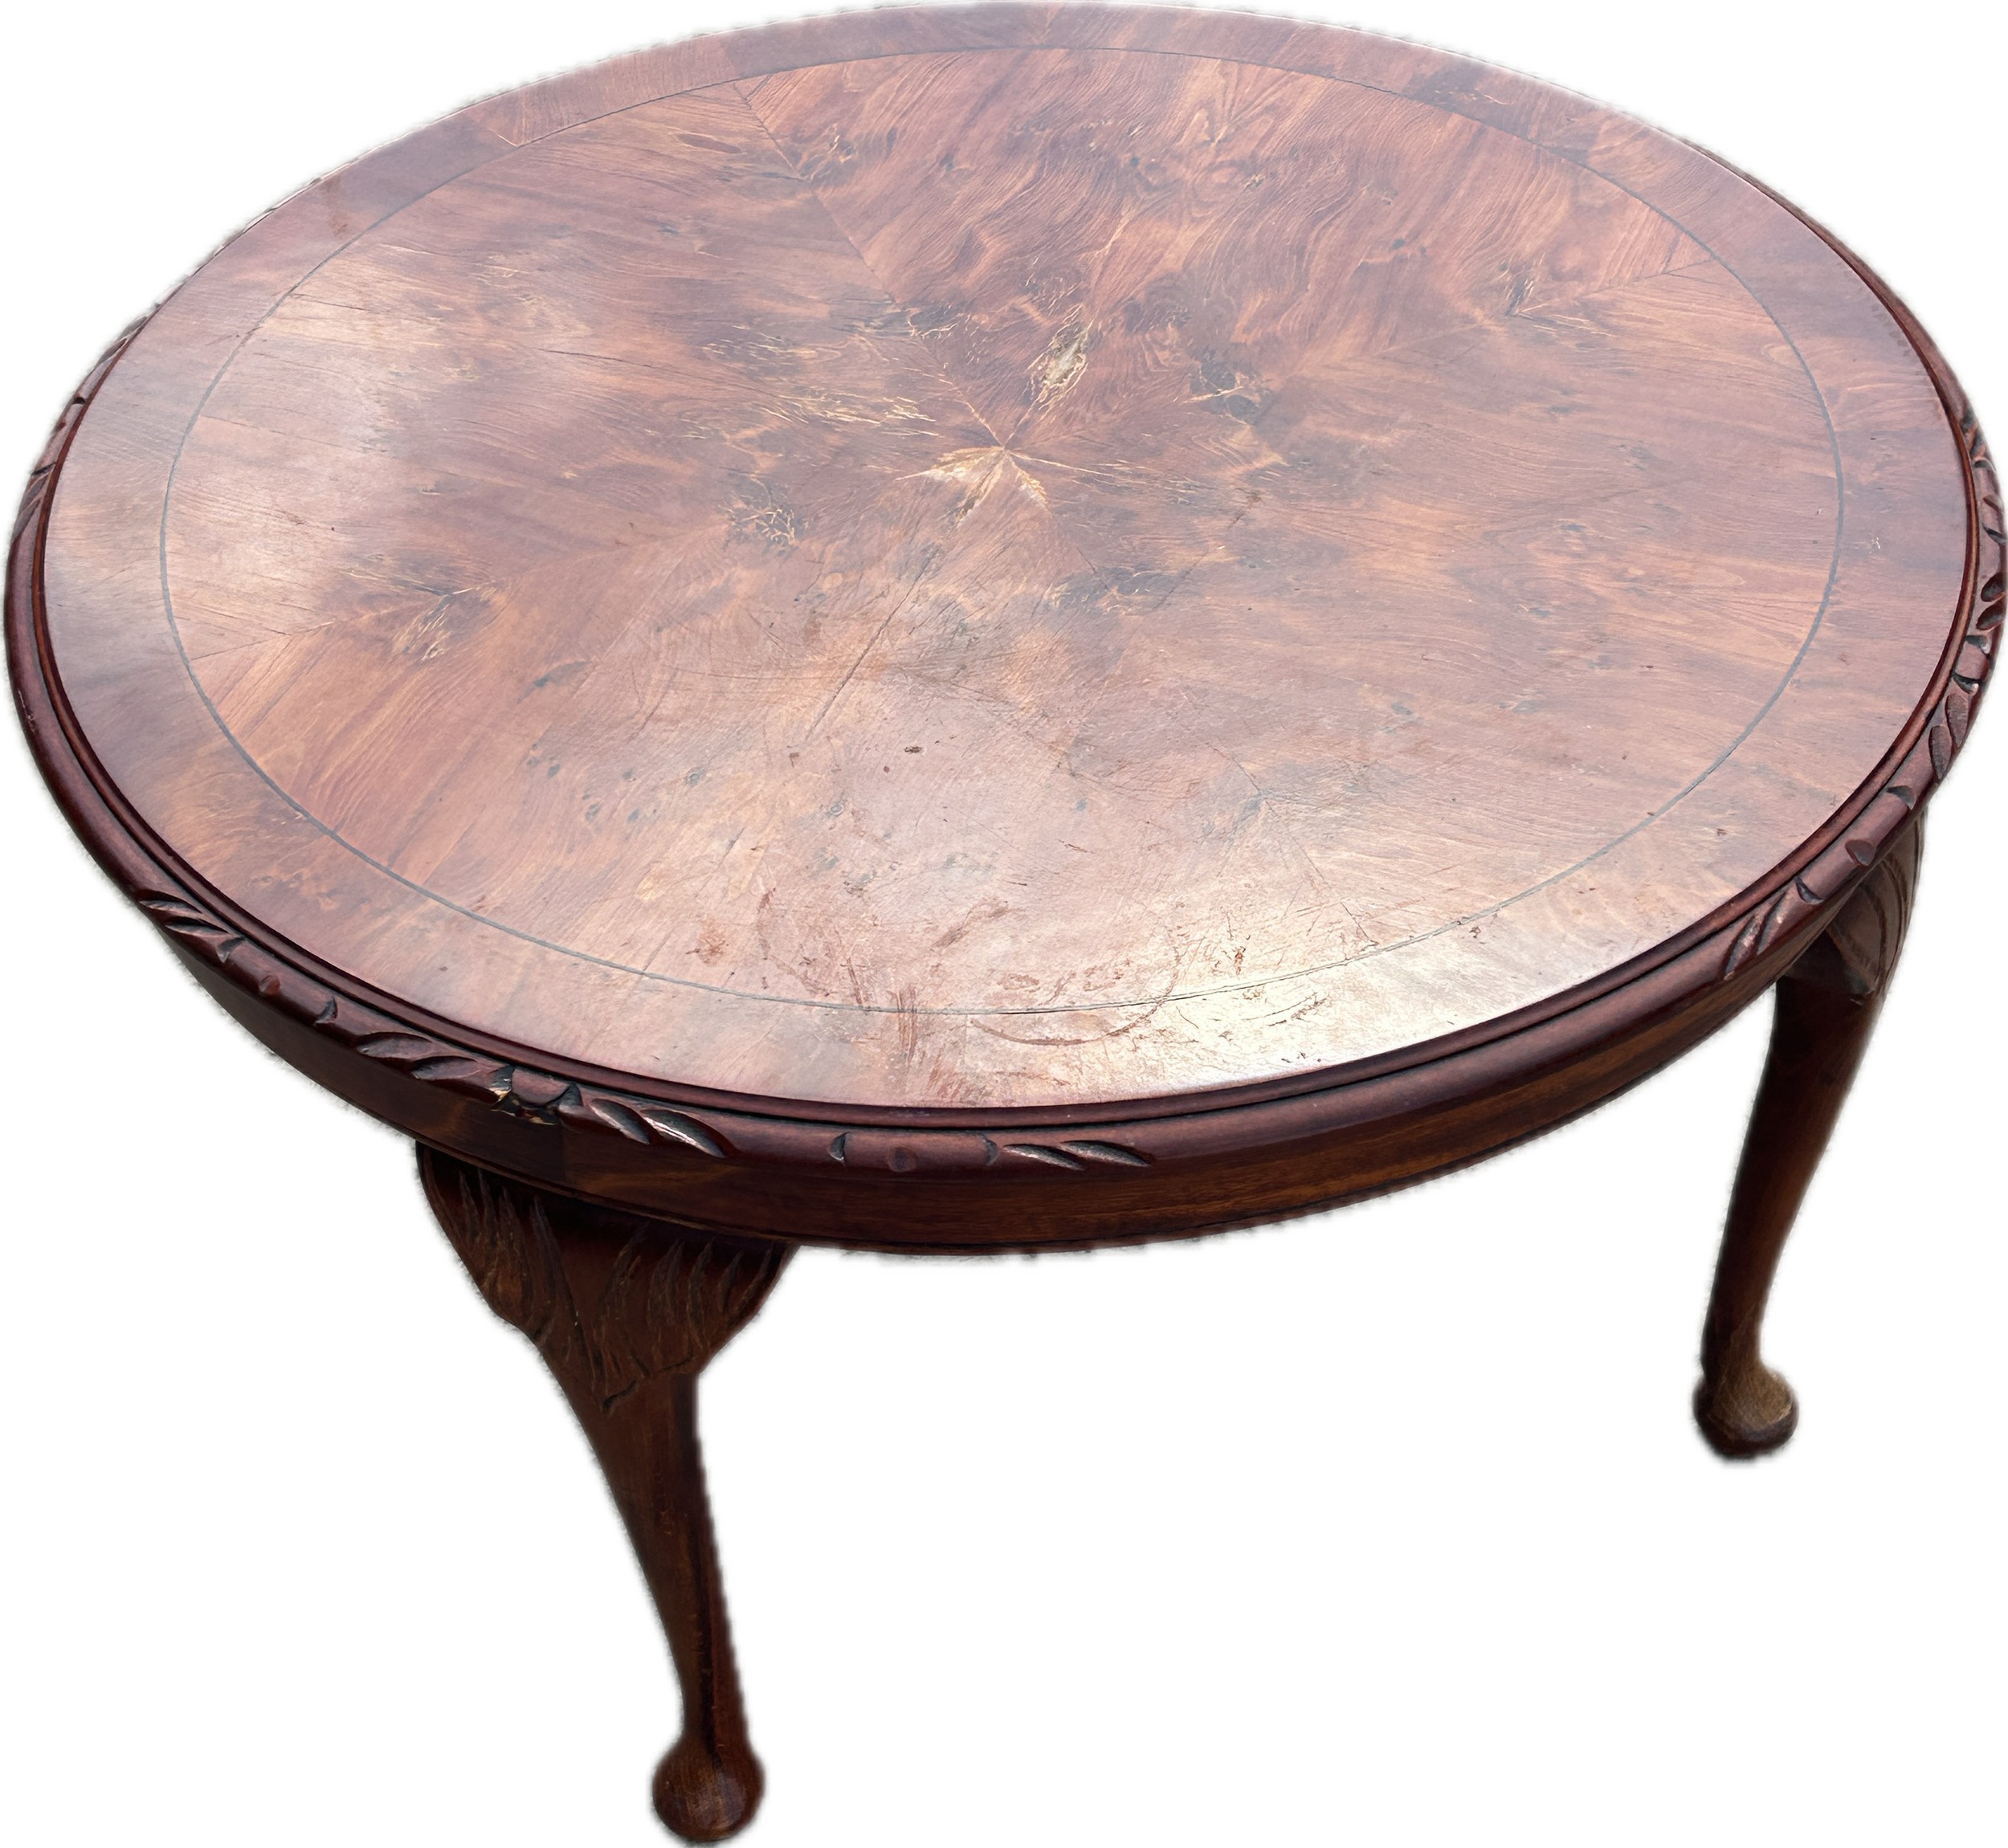 Walnut circular coffee table, height 17 inches, diameter 30 inches